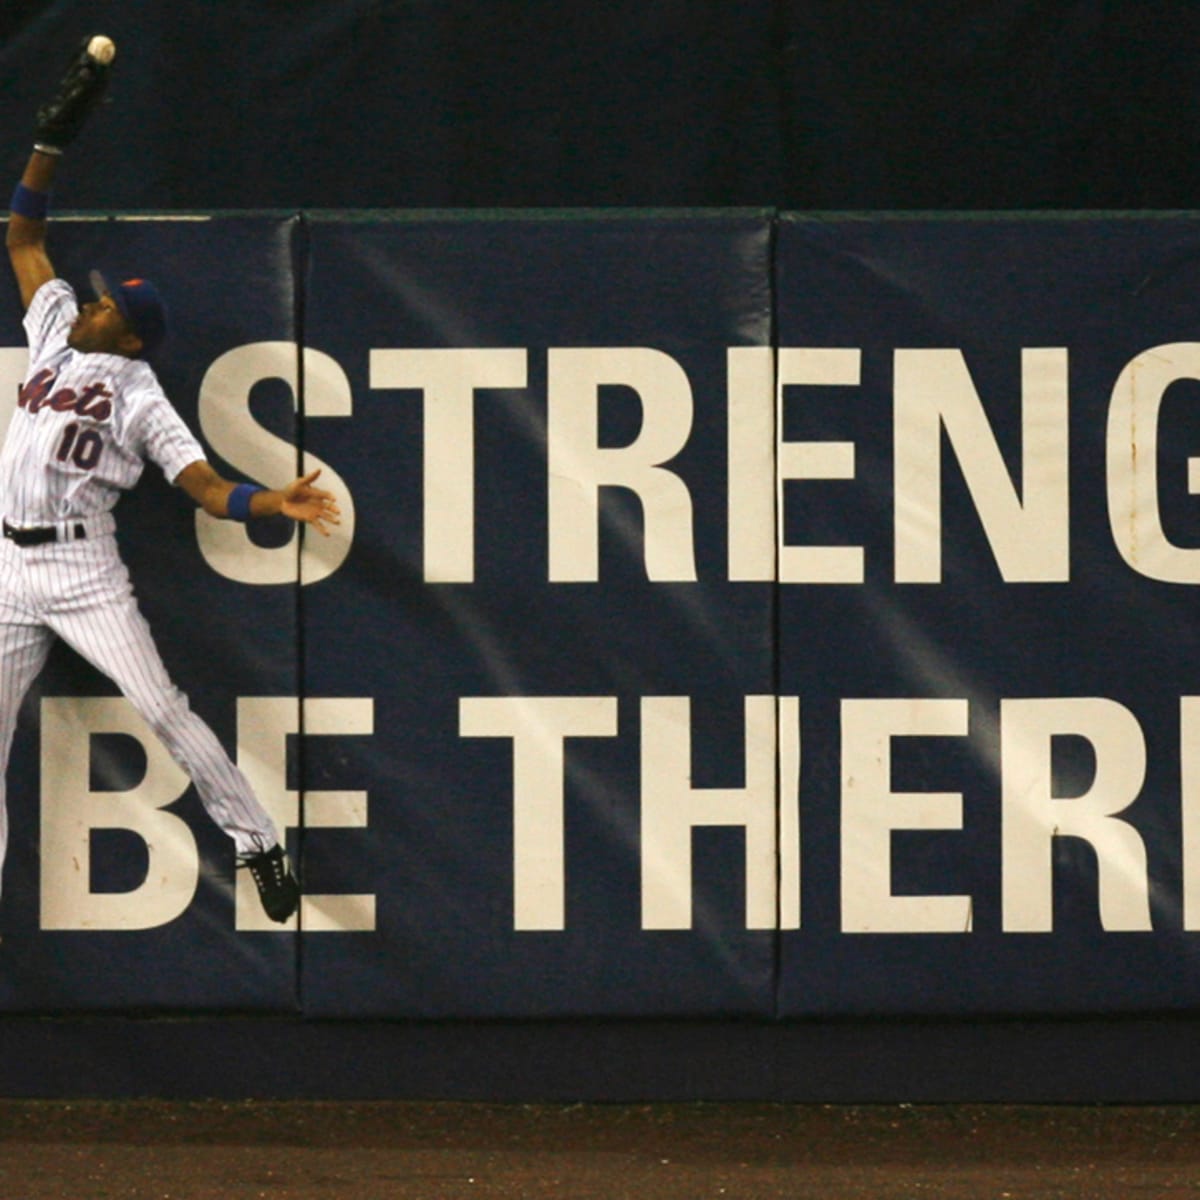 Endy Chavez  Collect the Mets